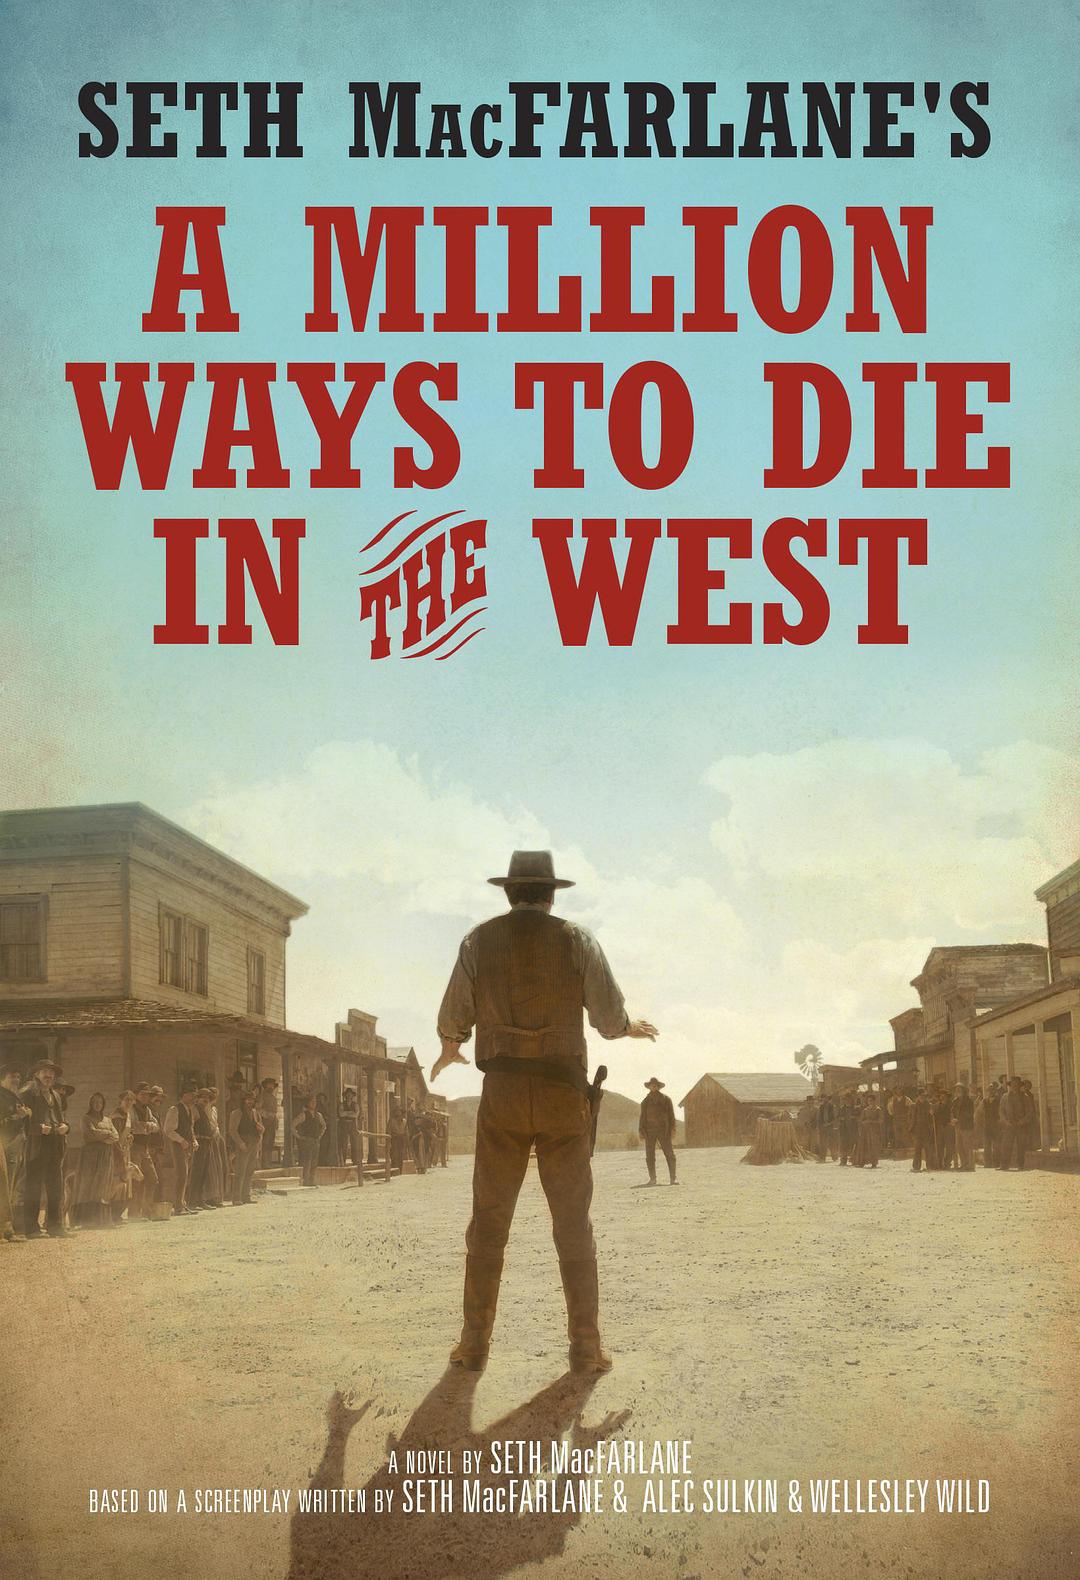 һַʽ/ A.Million.Ways.to.Die.in.the.West.2014.EXTENDED.CUT.1080p.BluRay-1.png